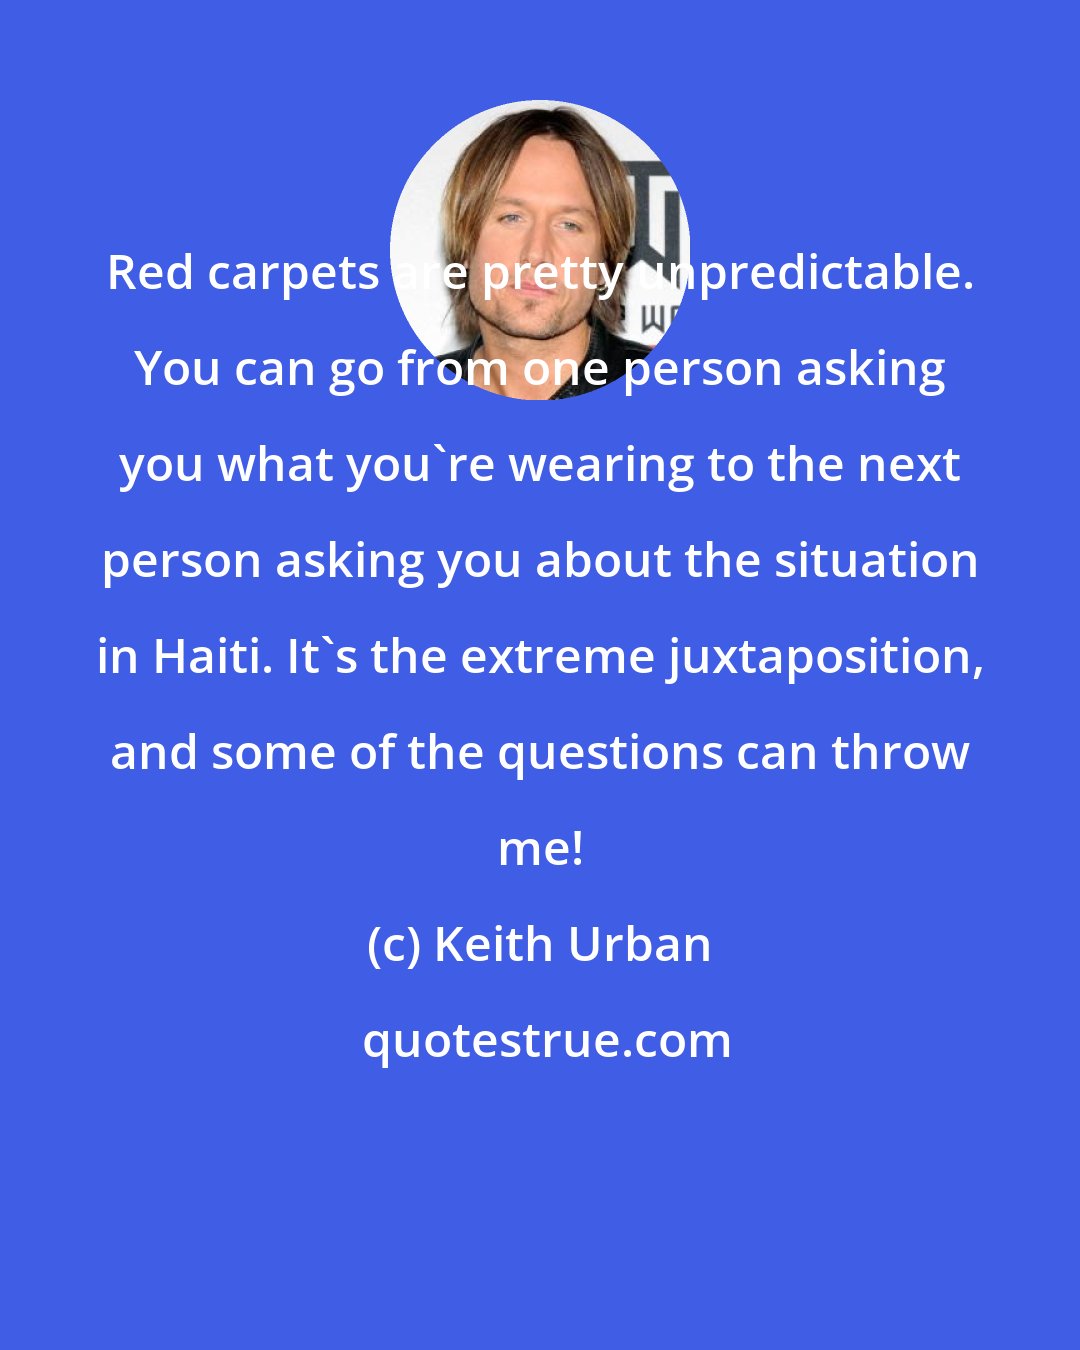 Keith Urban: Red carpets are pretty unpredictable. You can go from one person asking you what you're wearing to the next person asking you about the situation in Haiti. It's the extreme juxtaposition, and some of the questions can throw me!